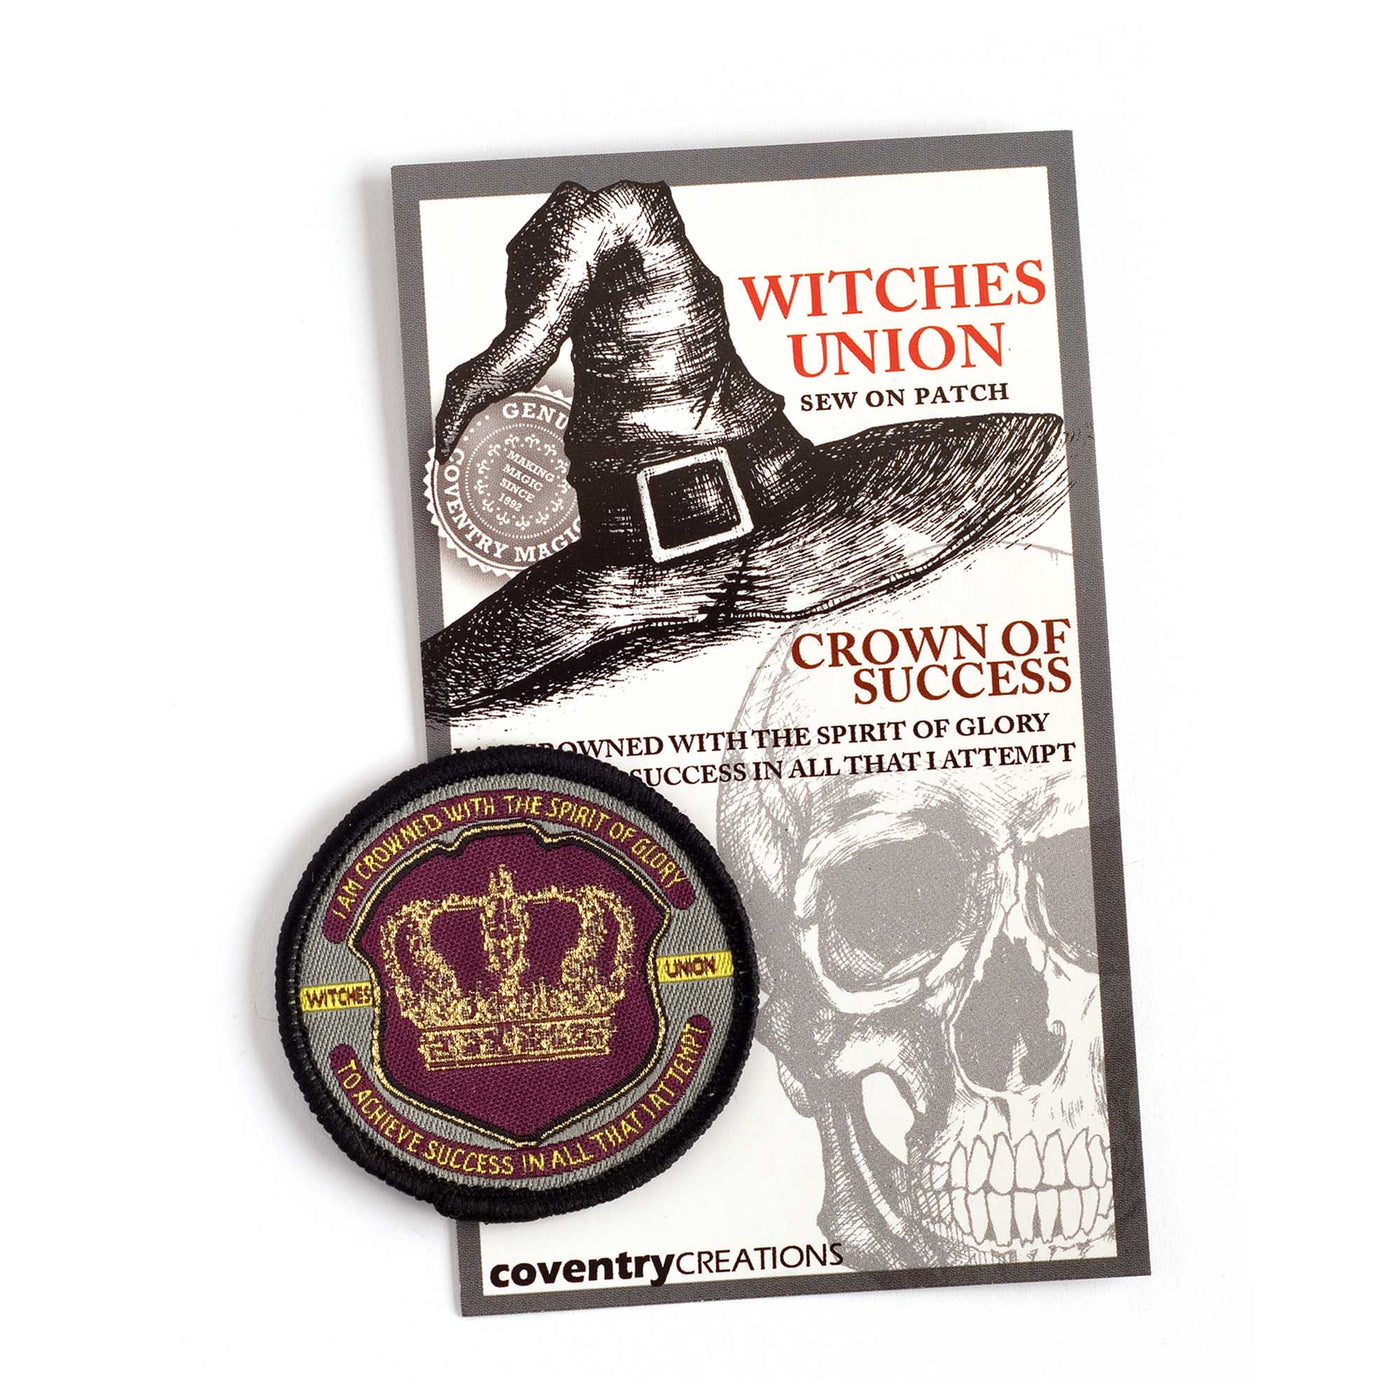 Coventry Creations Witches Union- Magical Adept Crown of Success Patch with witch hat and skull in background